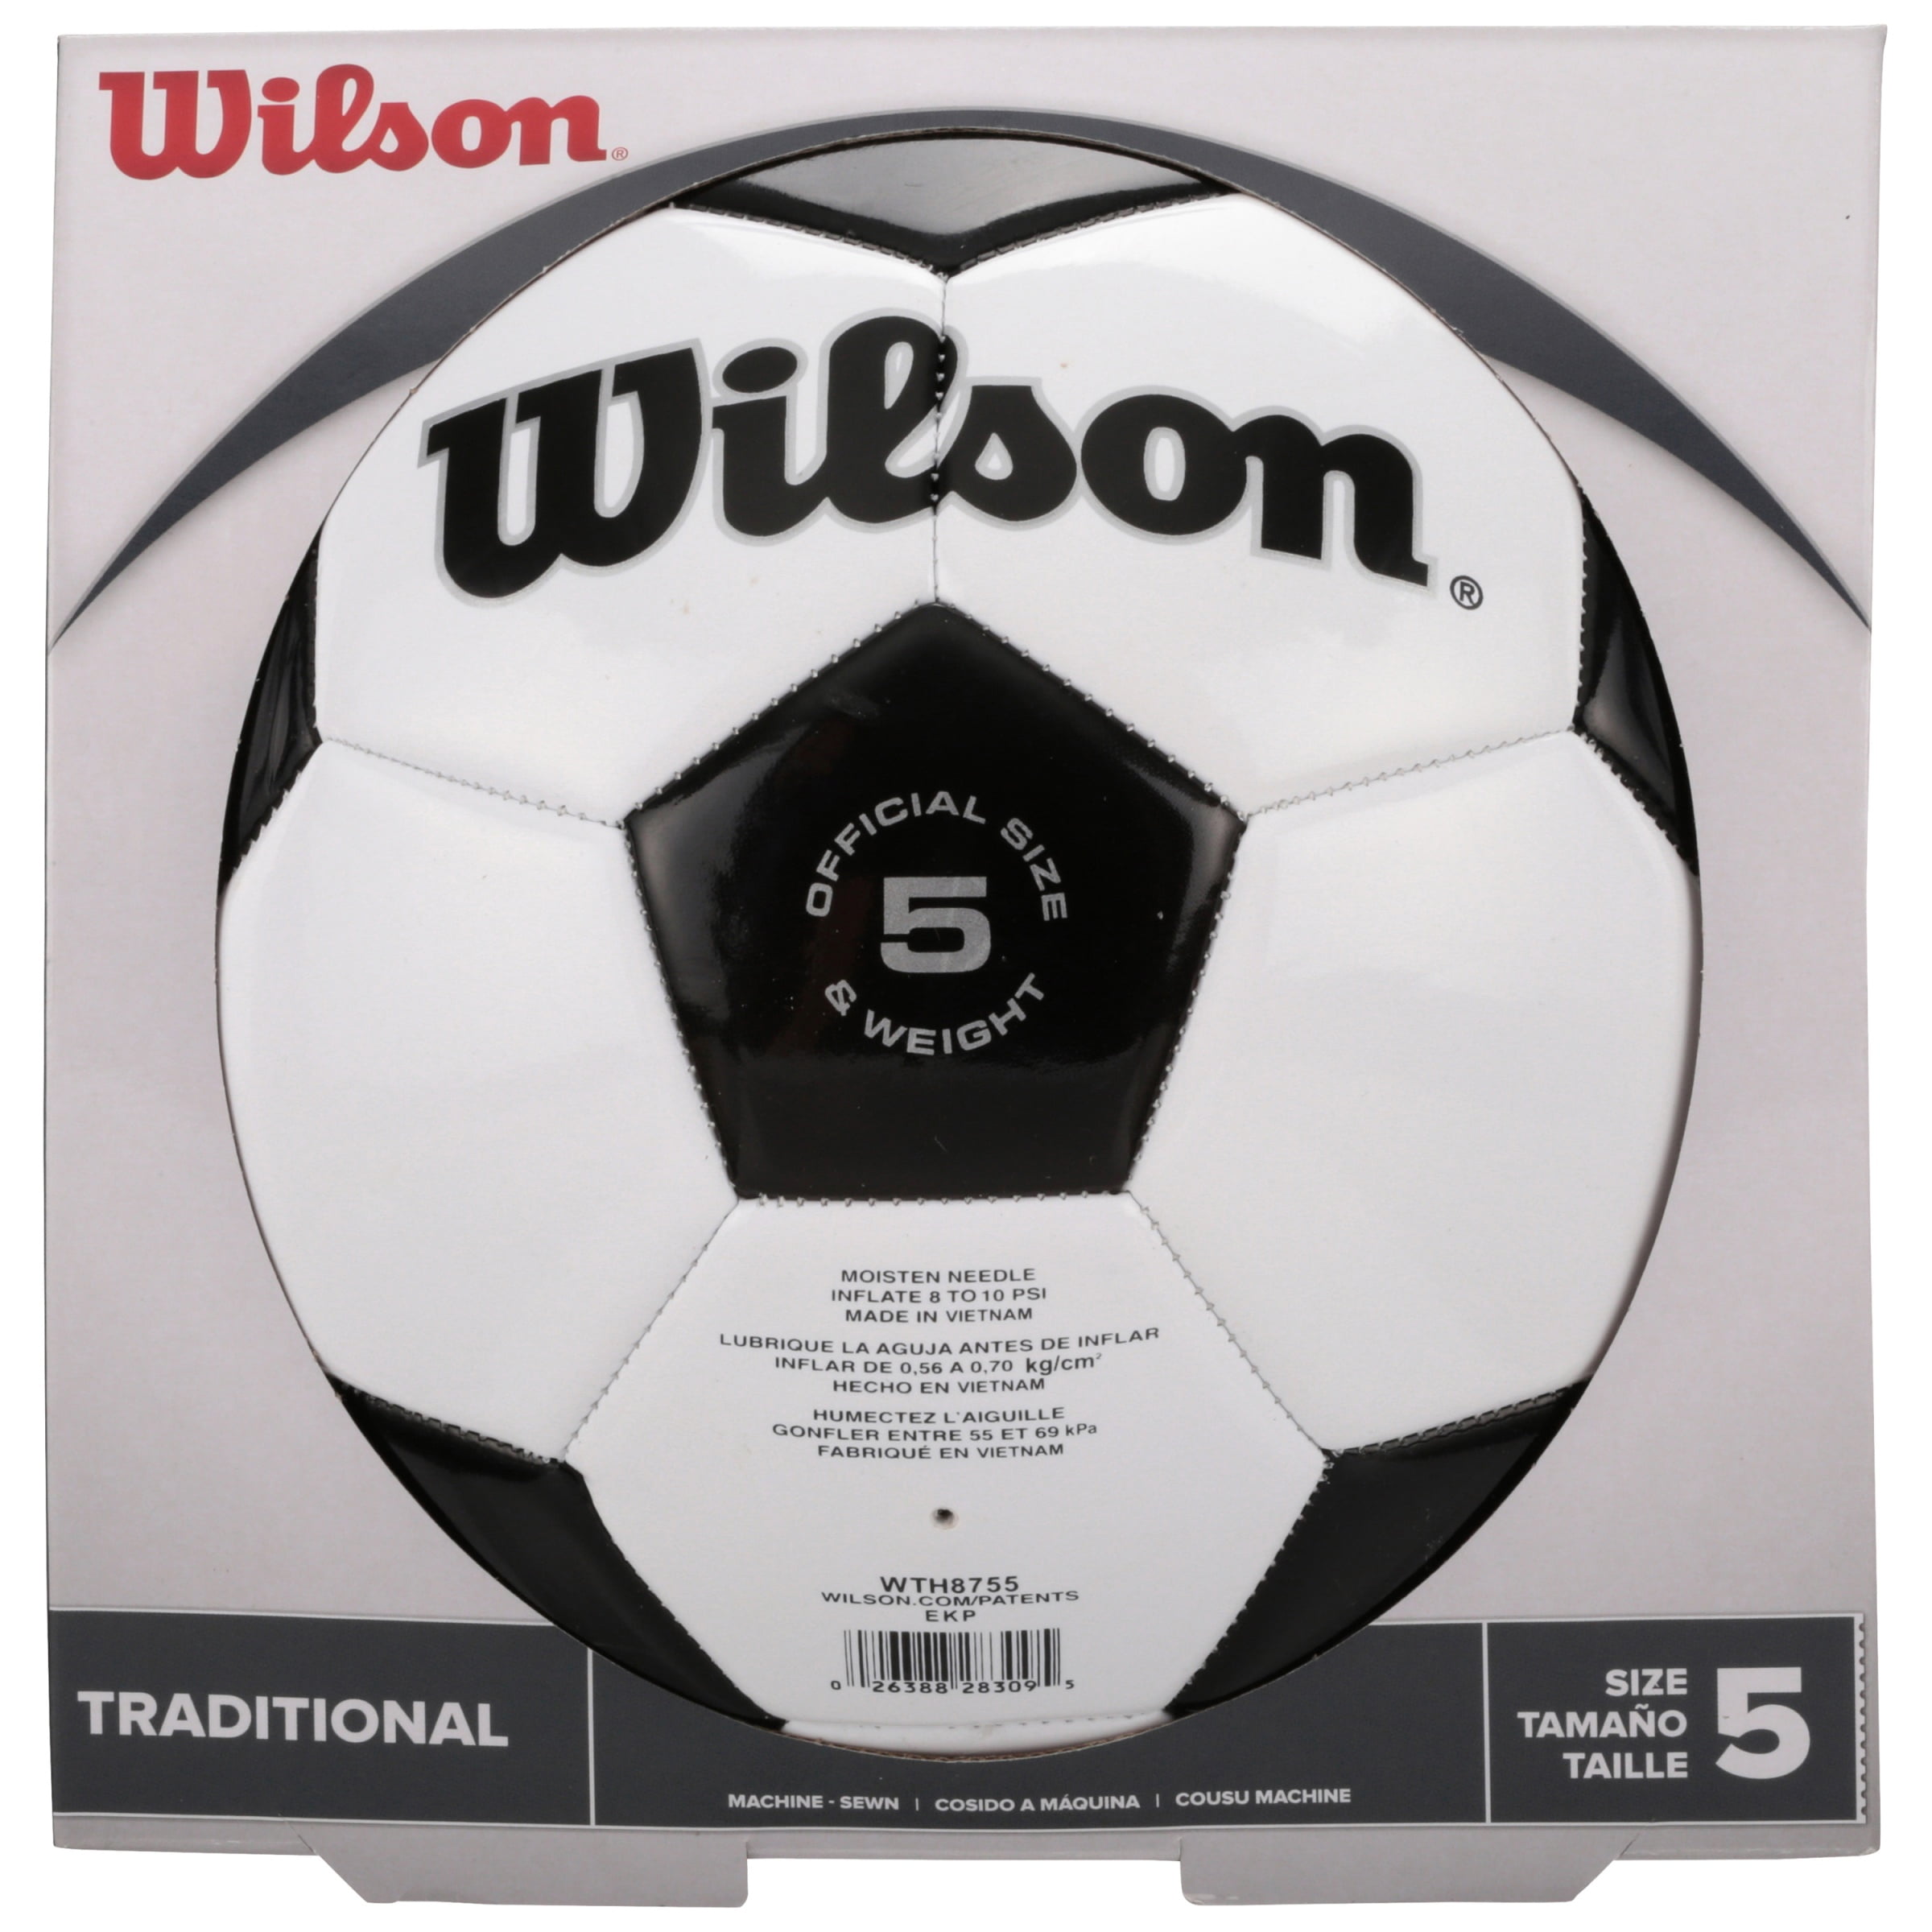 Wilson Traditional Soccer Ball Official Size 4 White-Black WTH8754 